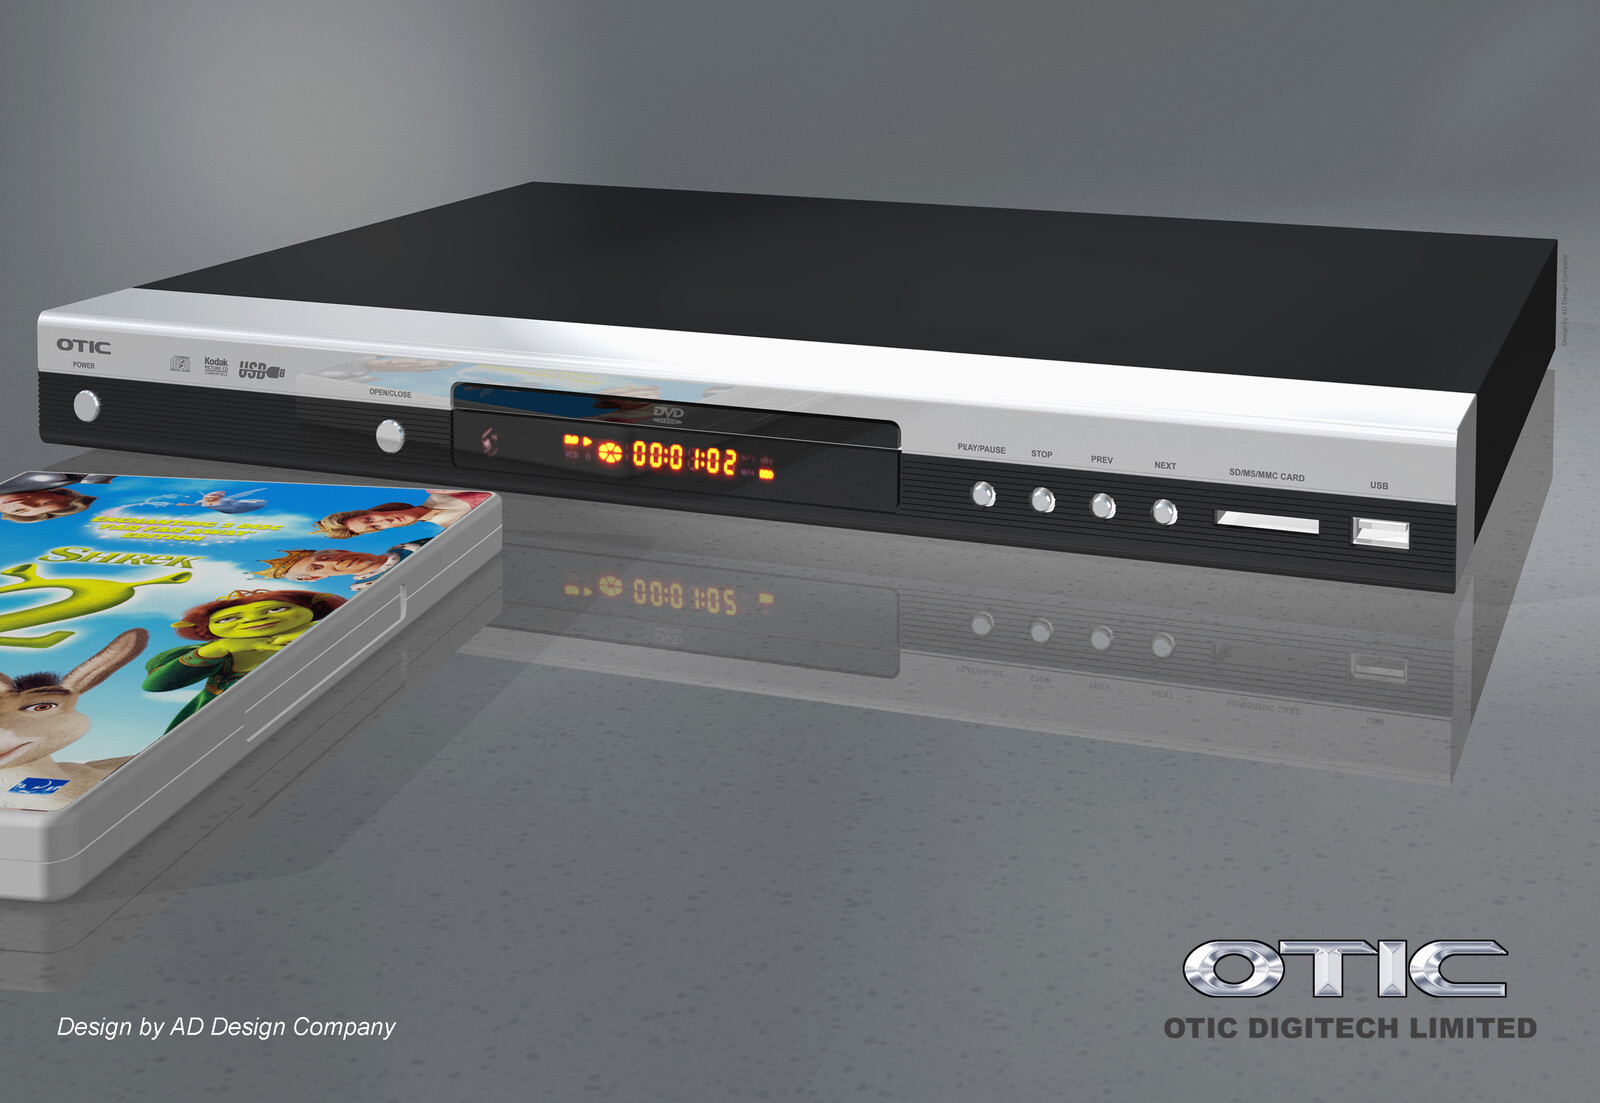 💎 Stand-Alone DVD Player | Design by Leung Chung Kwan on 2007 💎
Brand Name︰OTIC | Client︰OTIC Limited